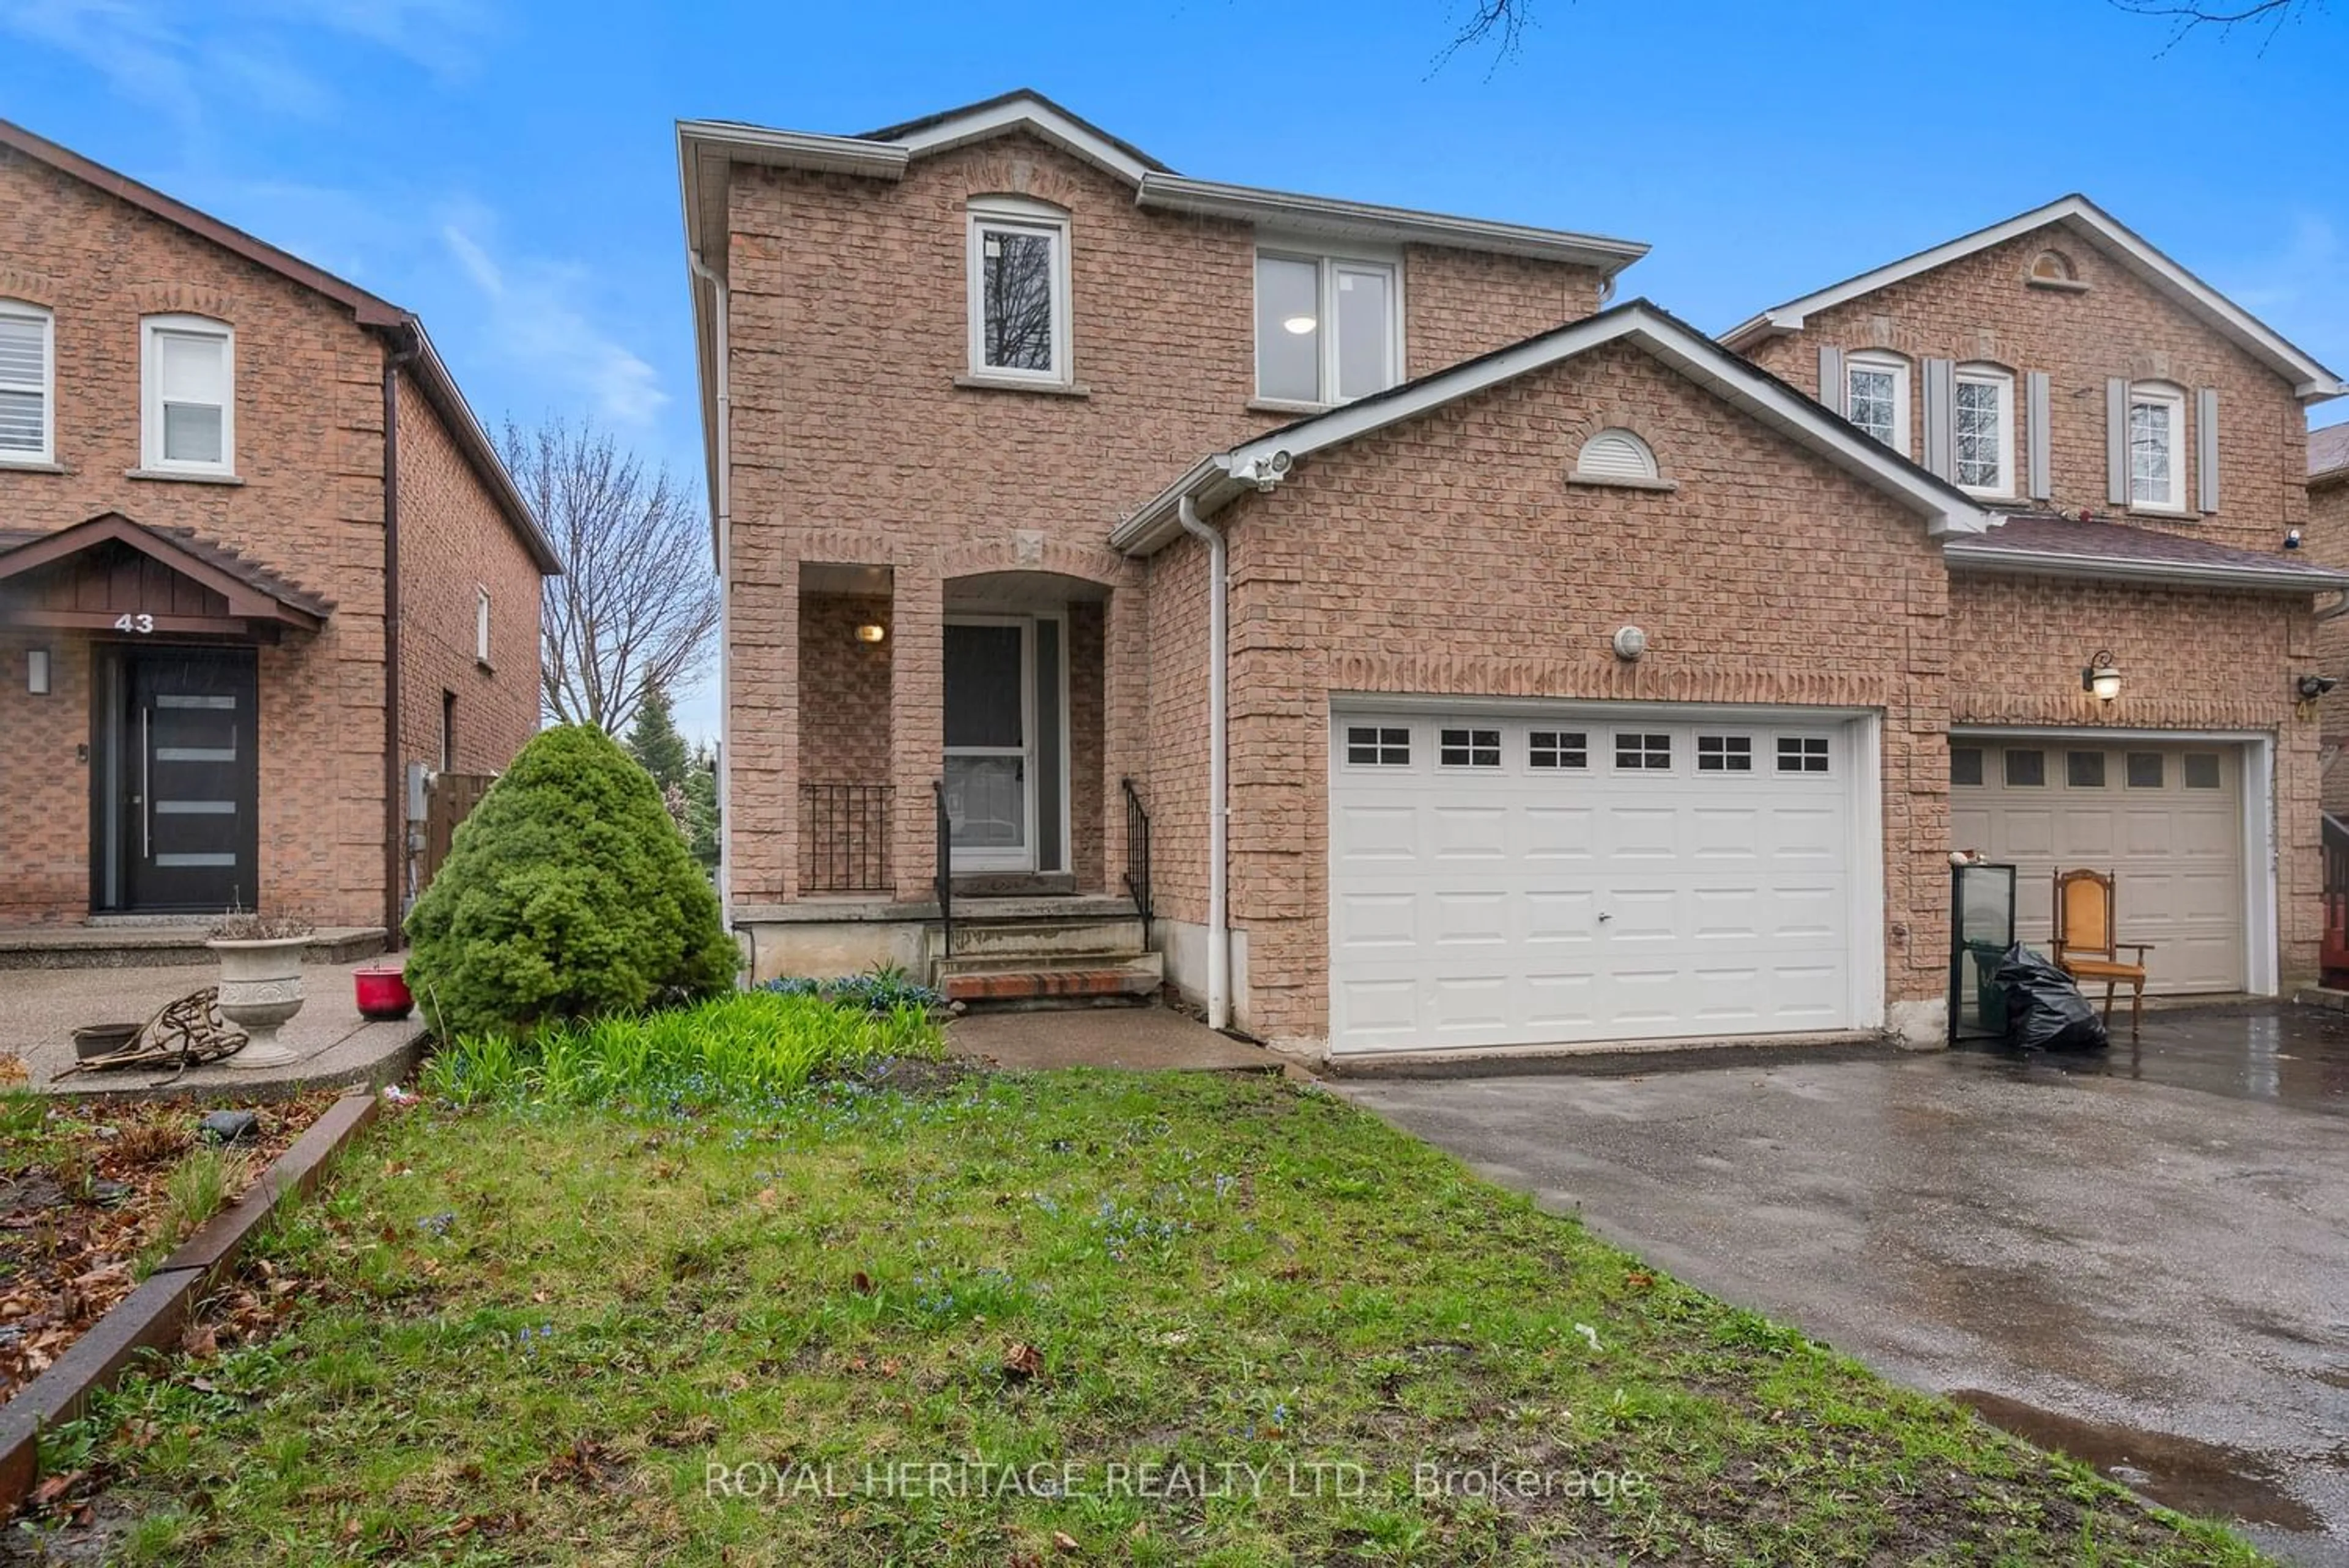 Home with brick exterior material for 45 Hewitt Cres, Ajax Ontario L1S 7A6